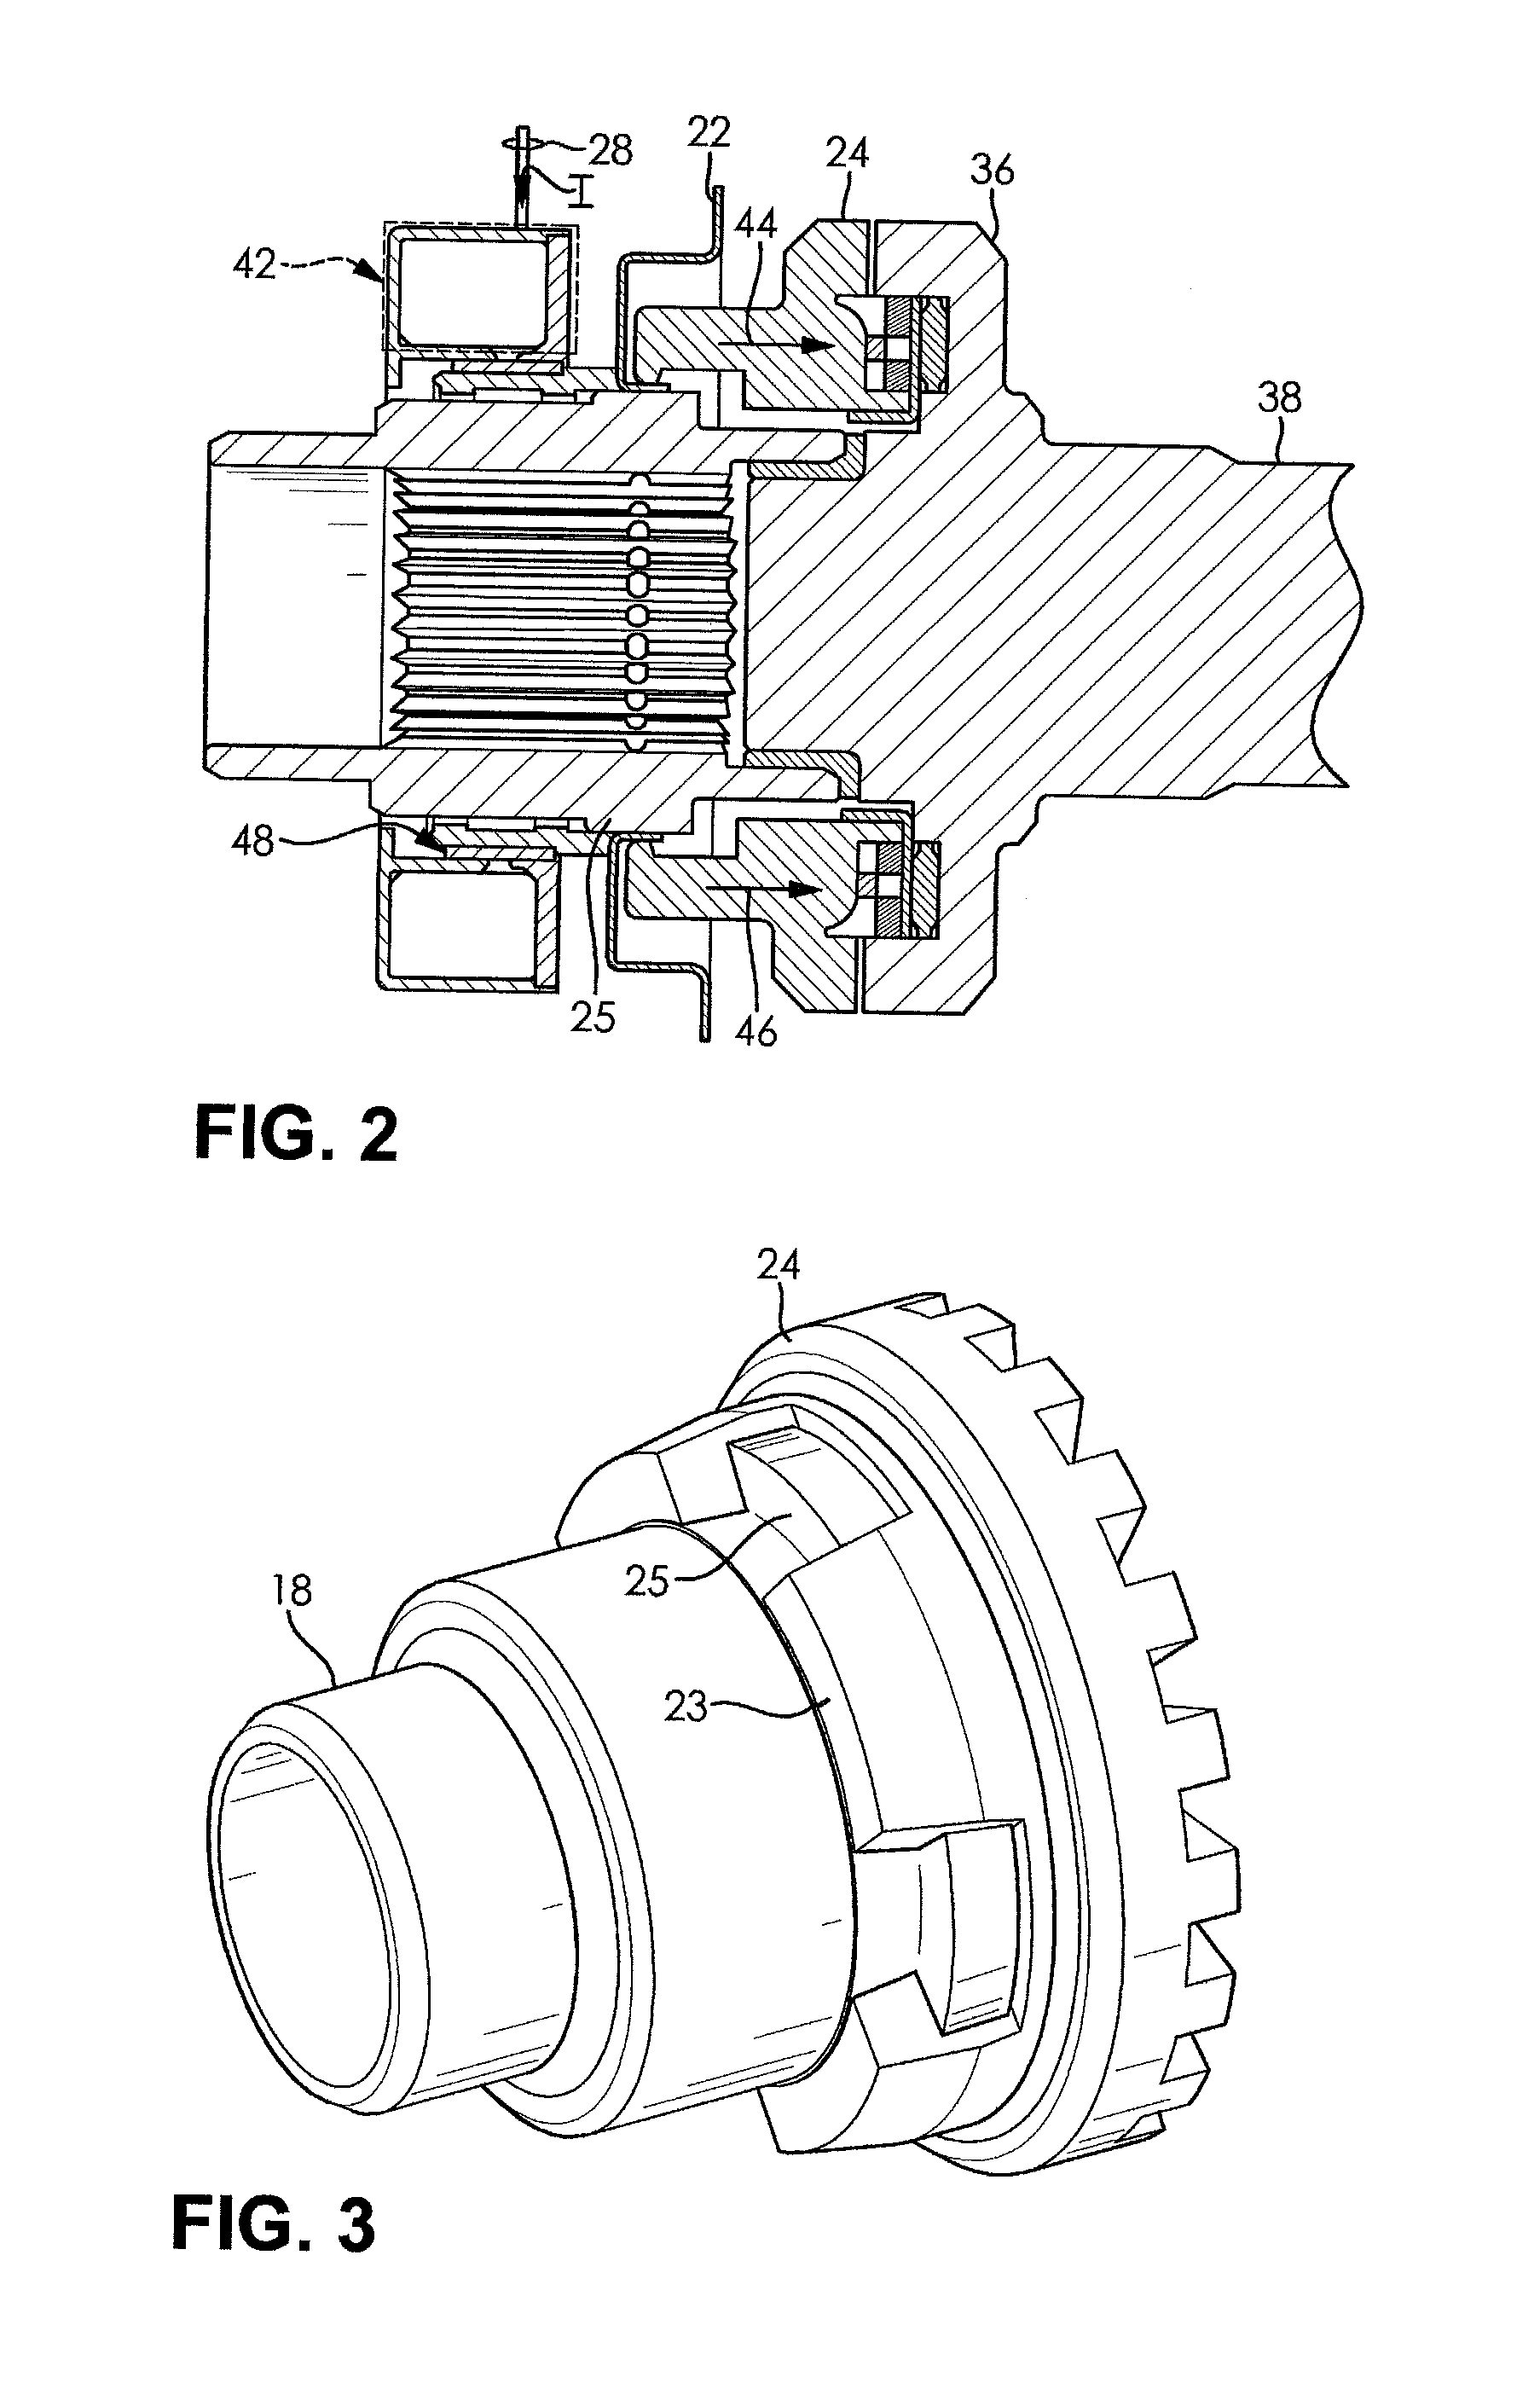 Electromagnetic axle disconnect system